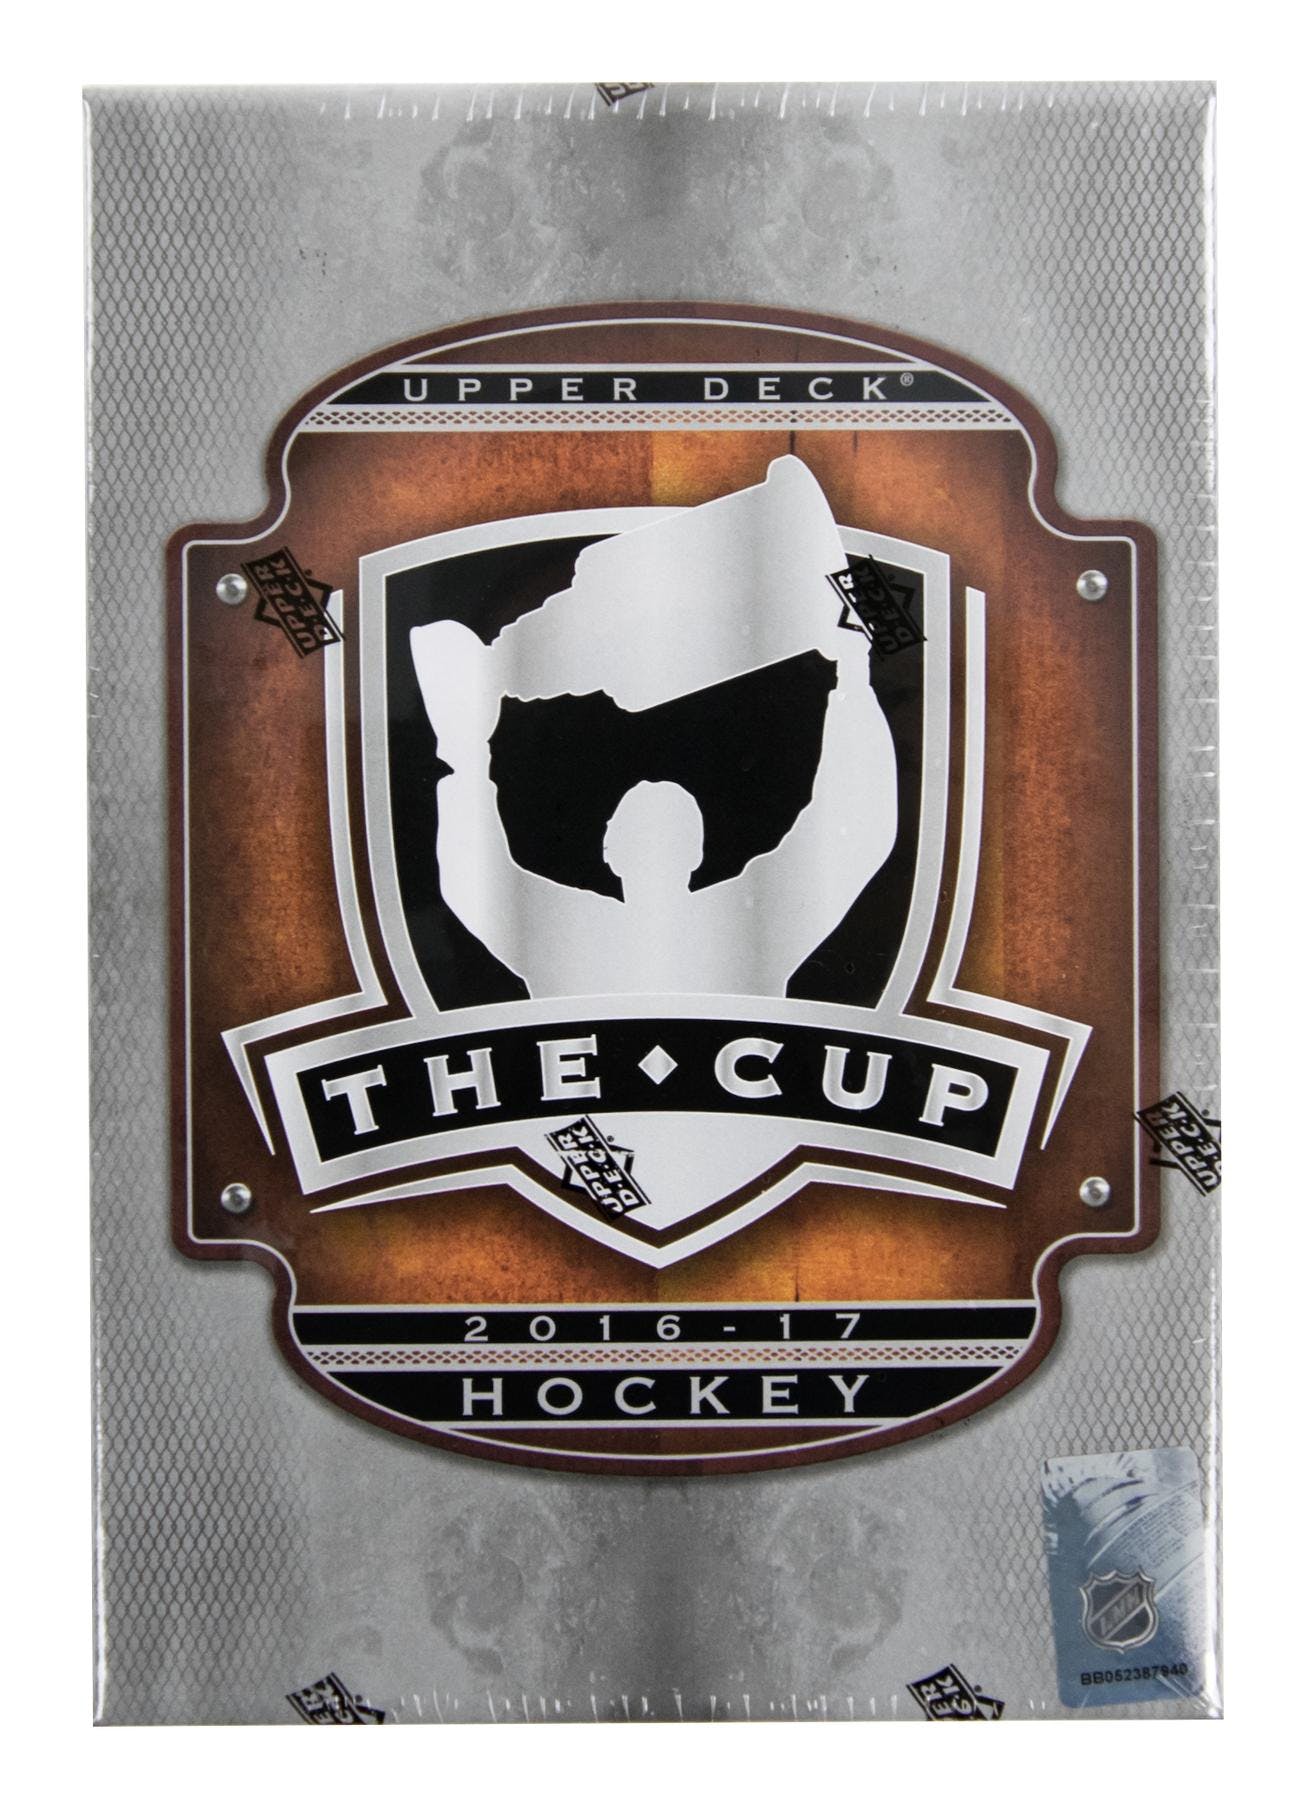 2016-17 Upper Deck The Cup Hockey Hobby Box